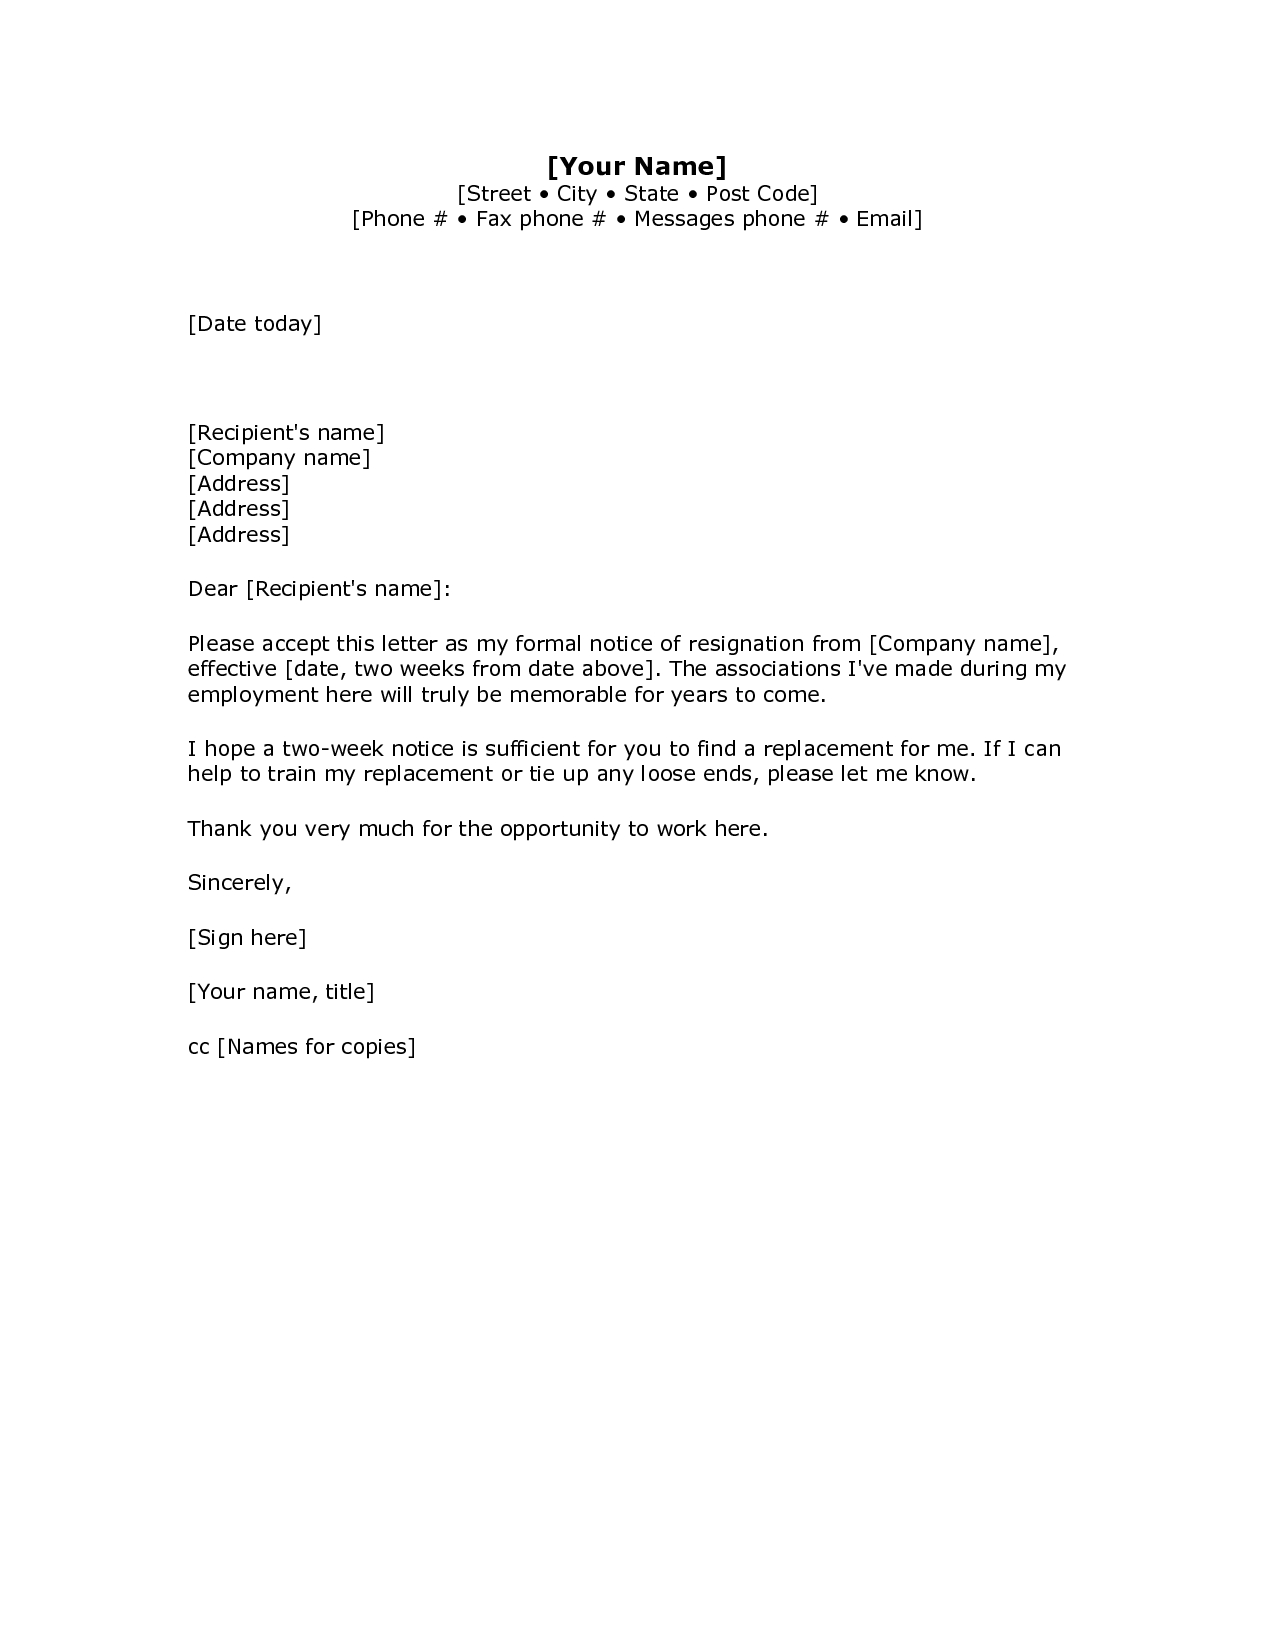 resignation letter format template example-2 Weeks Notice Letter Resignation Letter Week Notice Words HDWriting A Letter Resignation Email Letter Sample 1-l